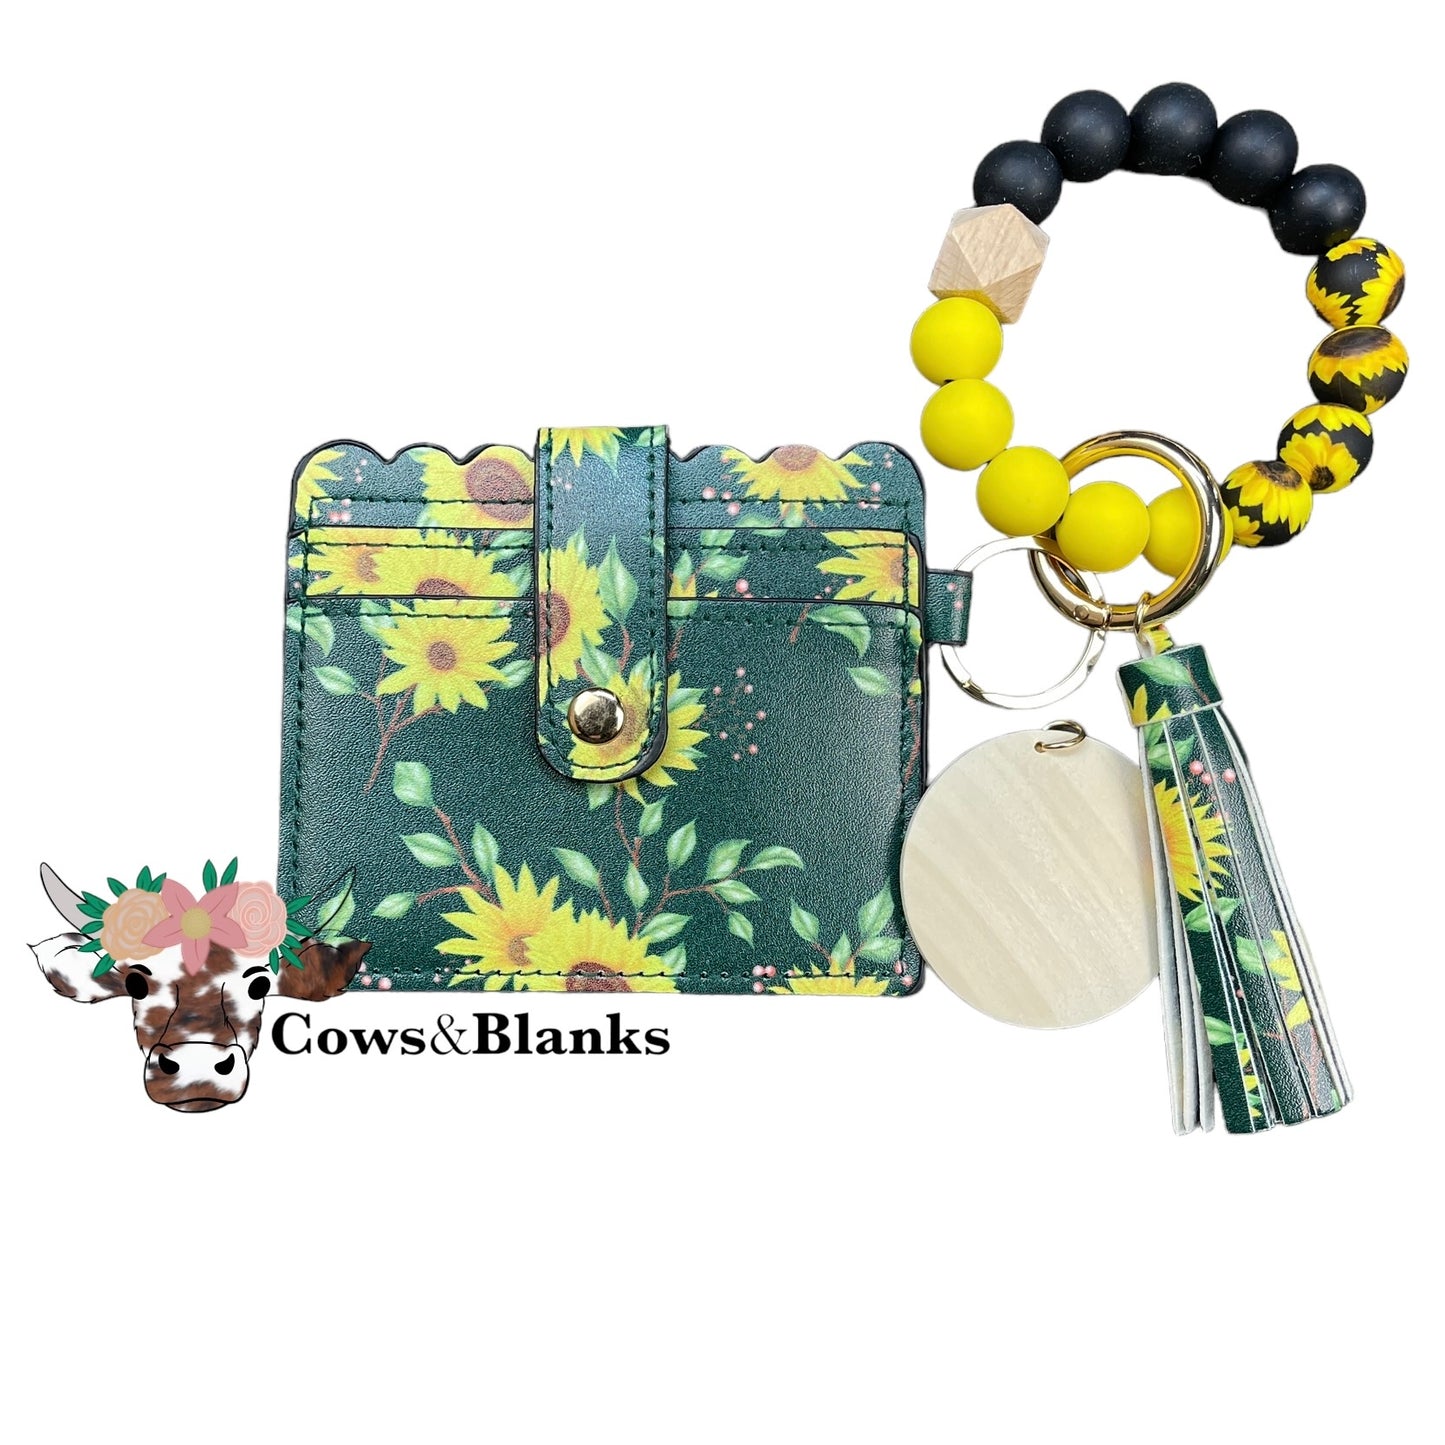 Wallet/Wristlet with Dark Green with Sunflowers Cardholder and a Black, Yellow, and Sunflower Silicone Beaded Wristlet with a Wooden Accent Bead, Gold Hardware, Matching Tassel, and a Wooden Disc